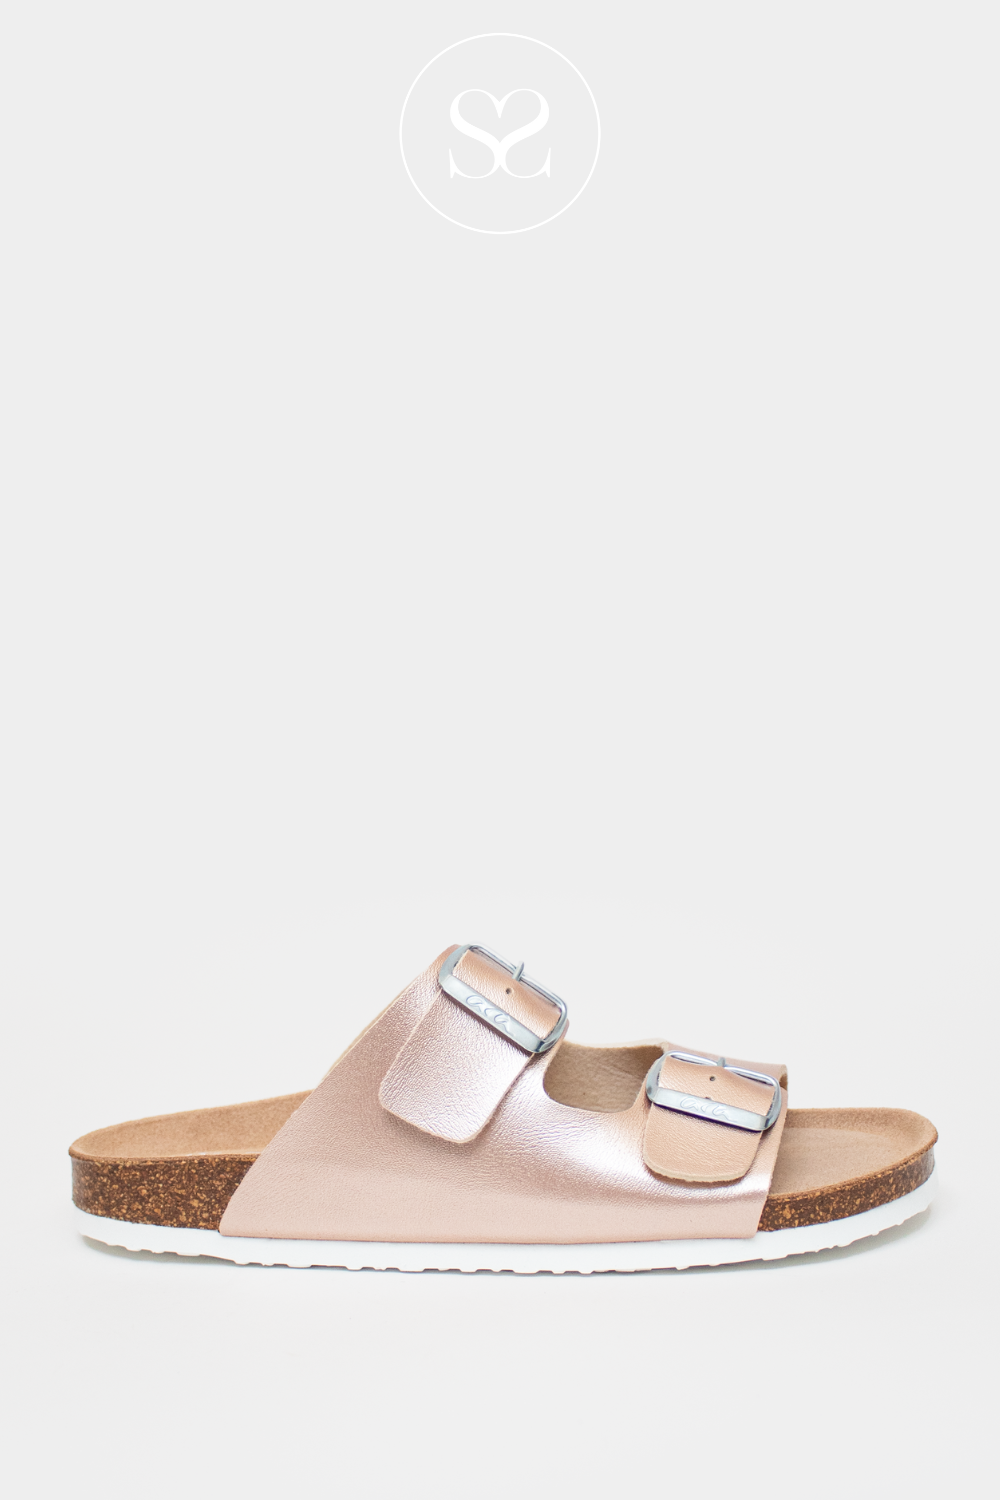 ARA SLIDER SANDALS IN ROSE GOLD WITH DOUBLE BUCKLE AND ARCH SUPPORT